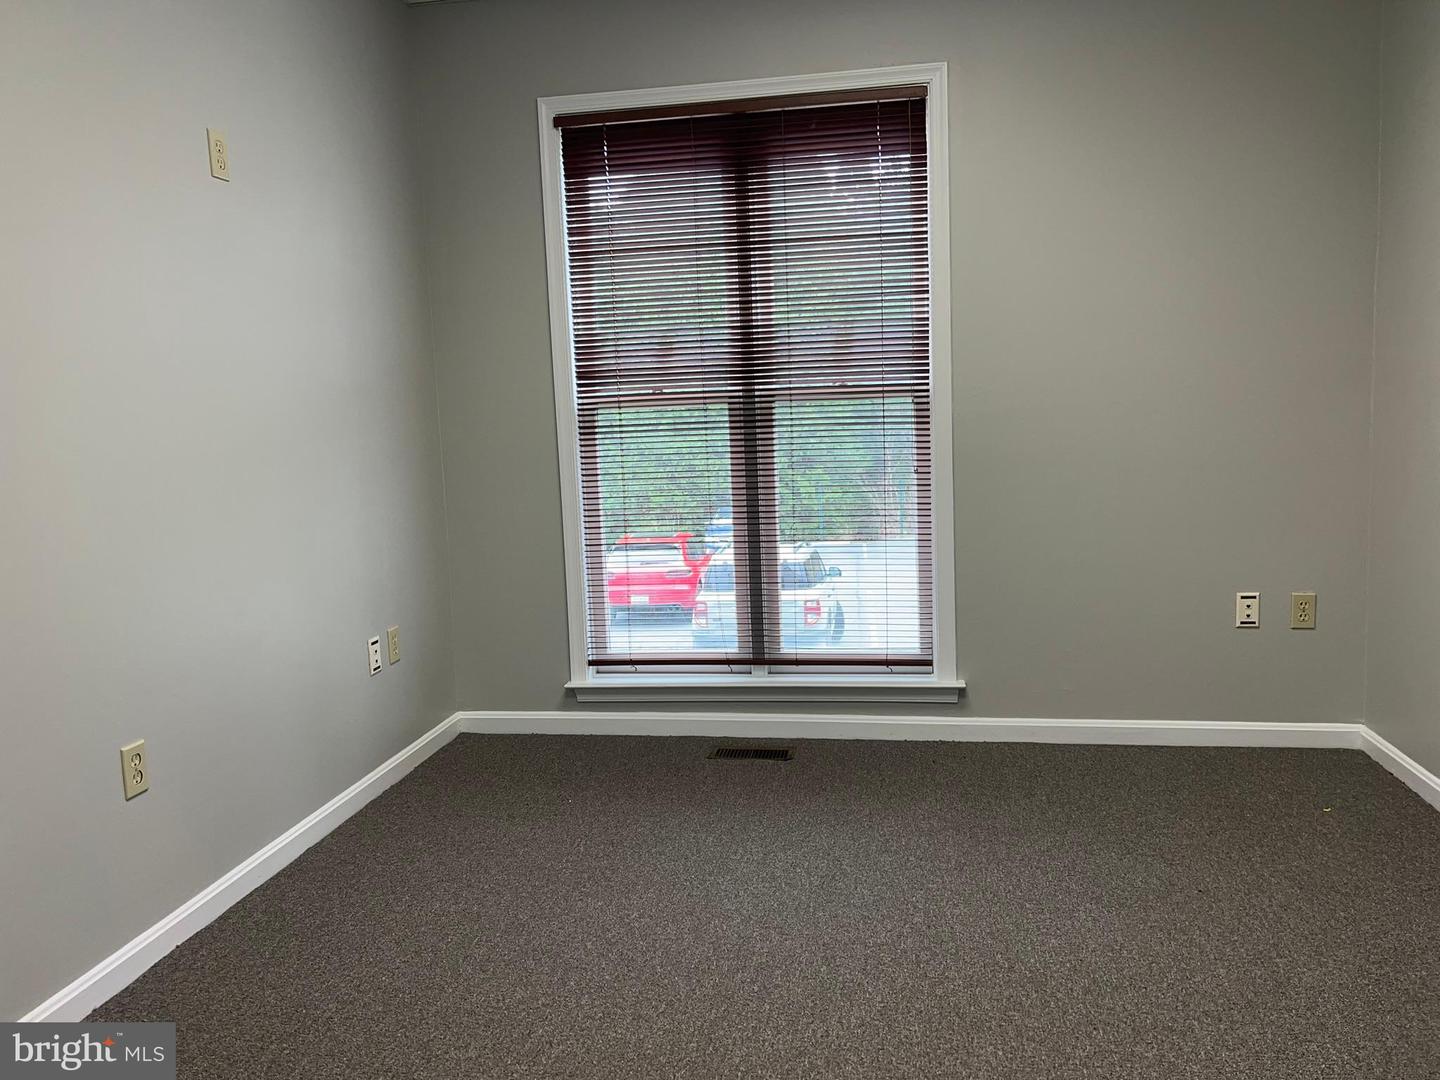 107-A W FEDERAL ST #1, MIDDLEBURG, Virginia 20117, ,Land,For sale,107-A W FEDERAL ST #1,VALO2066770 MLS # VALO2066770